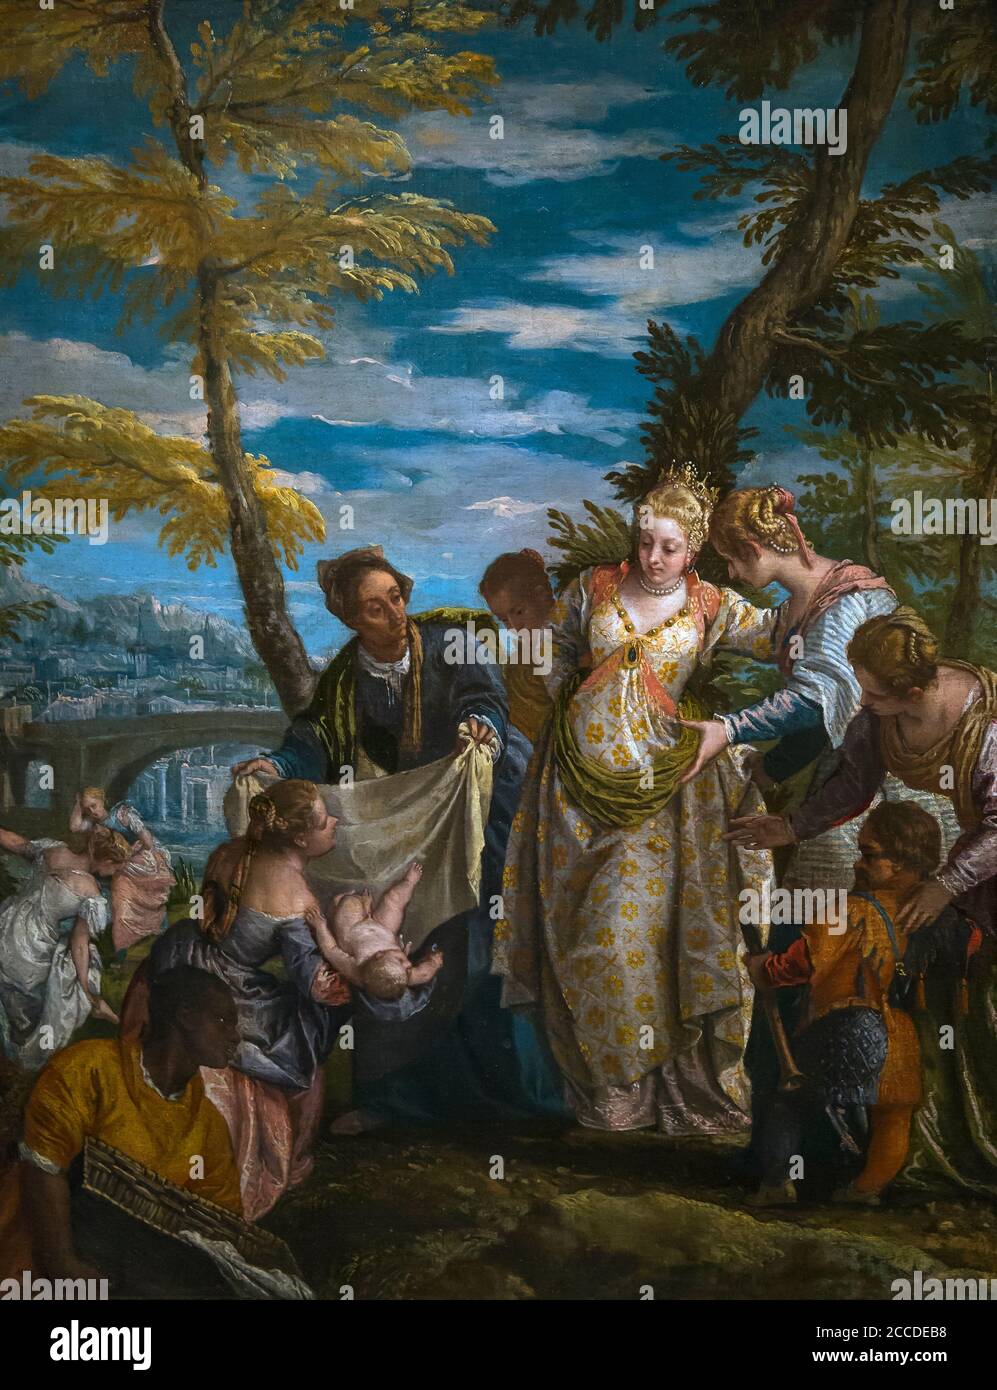 The Finding of Moses, Veronese, circa 1570-1575, National Gallery of Art, Washington DC, USA, North America Stock Photo